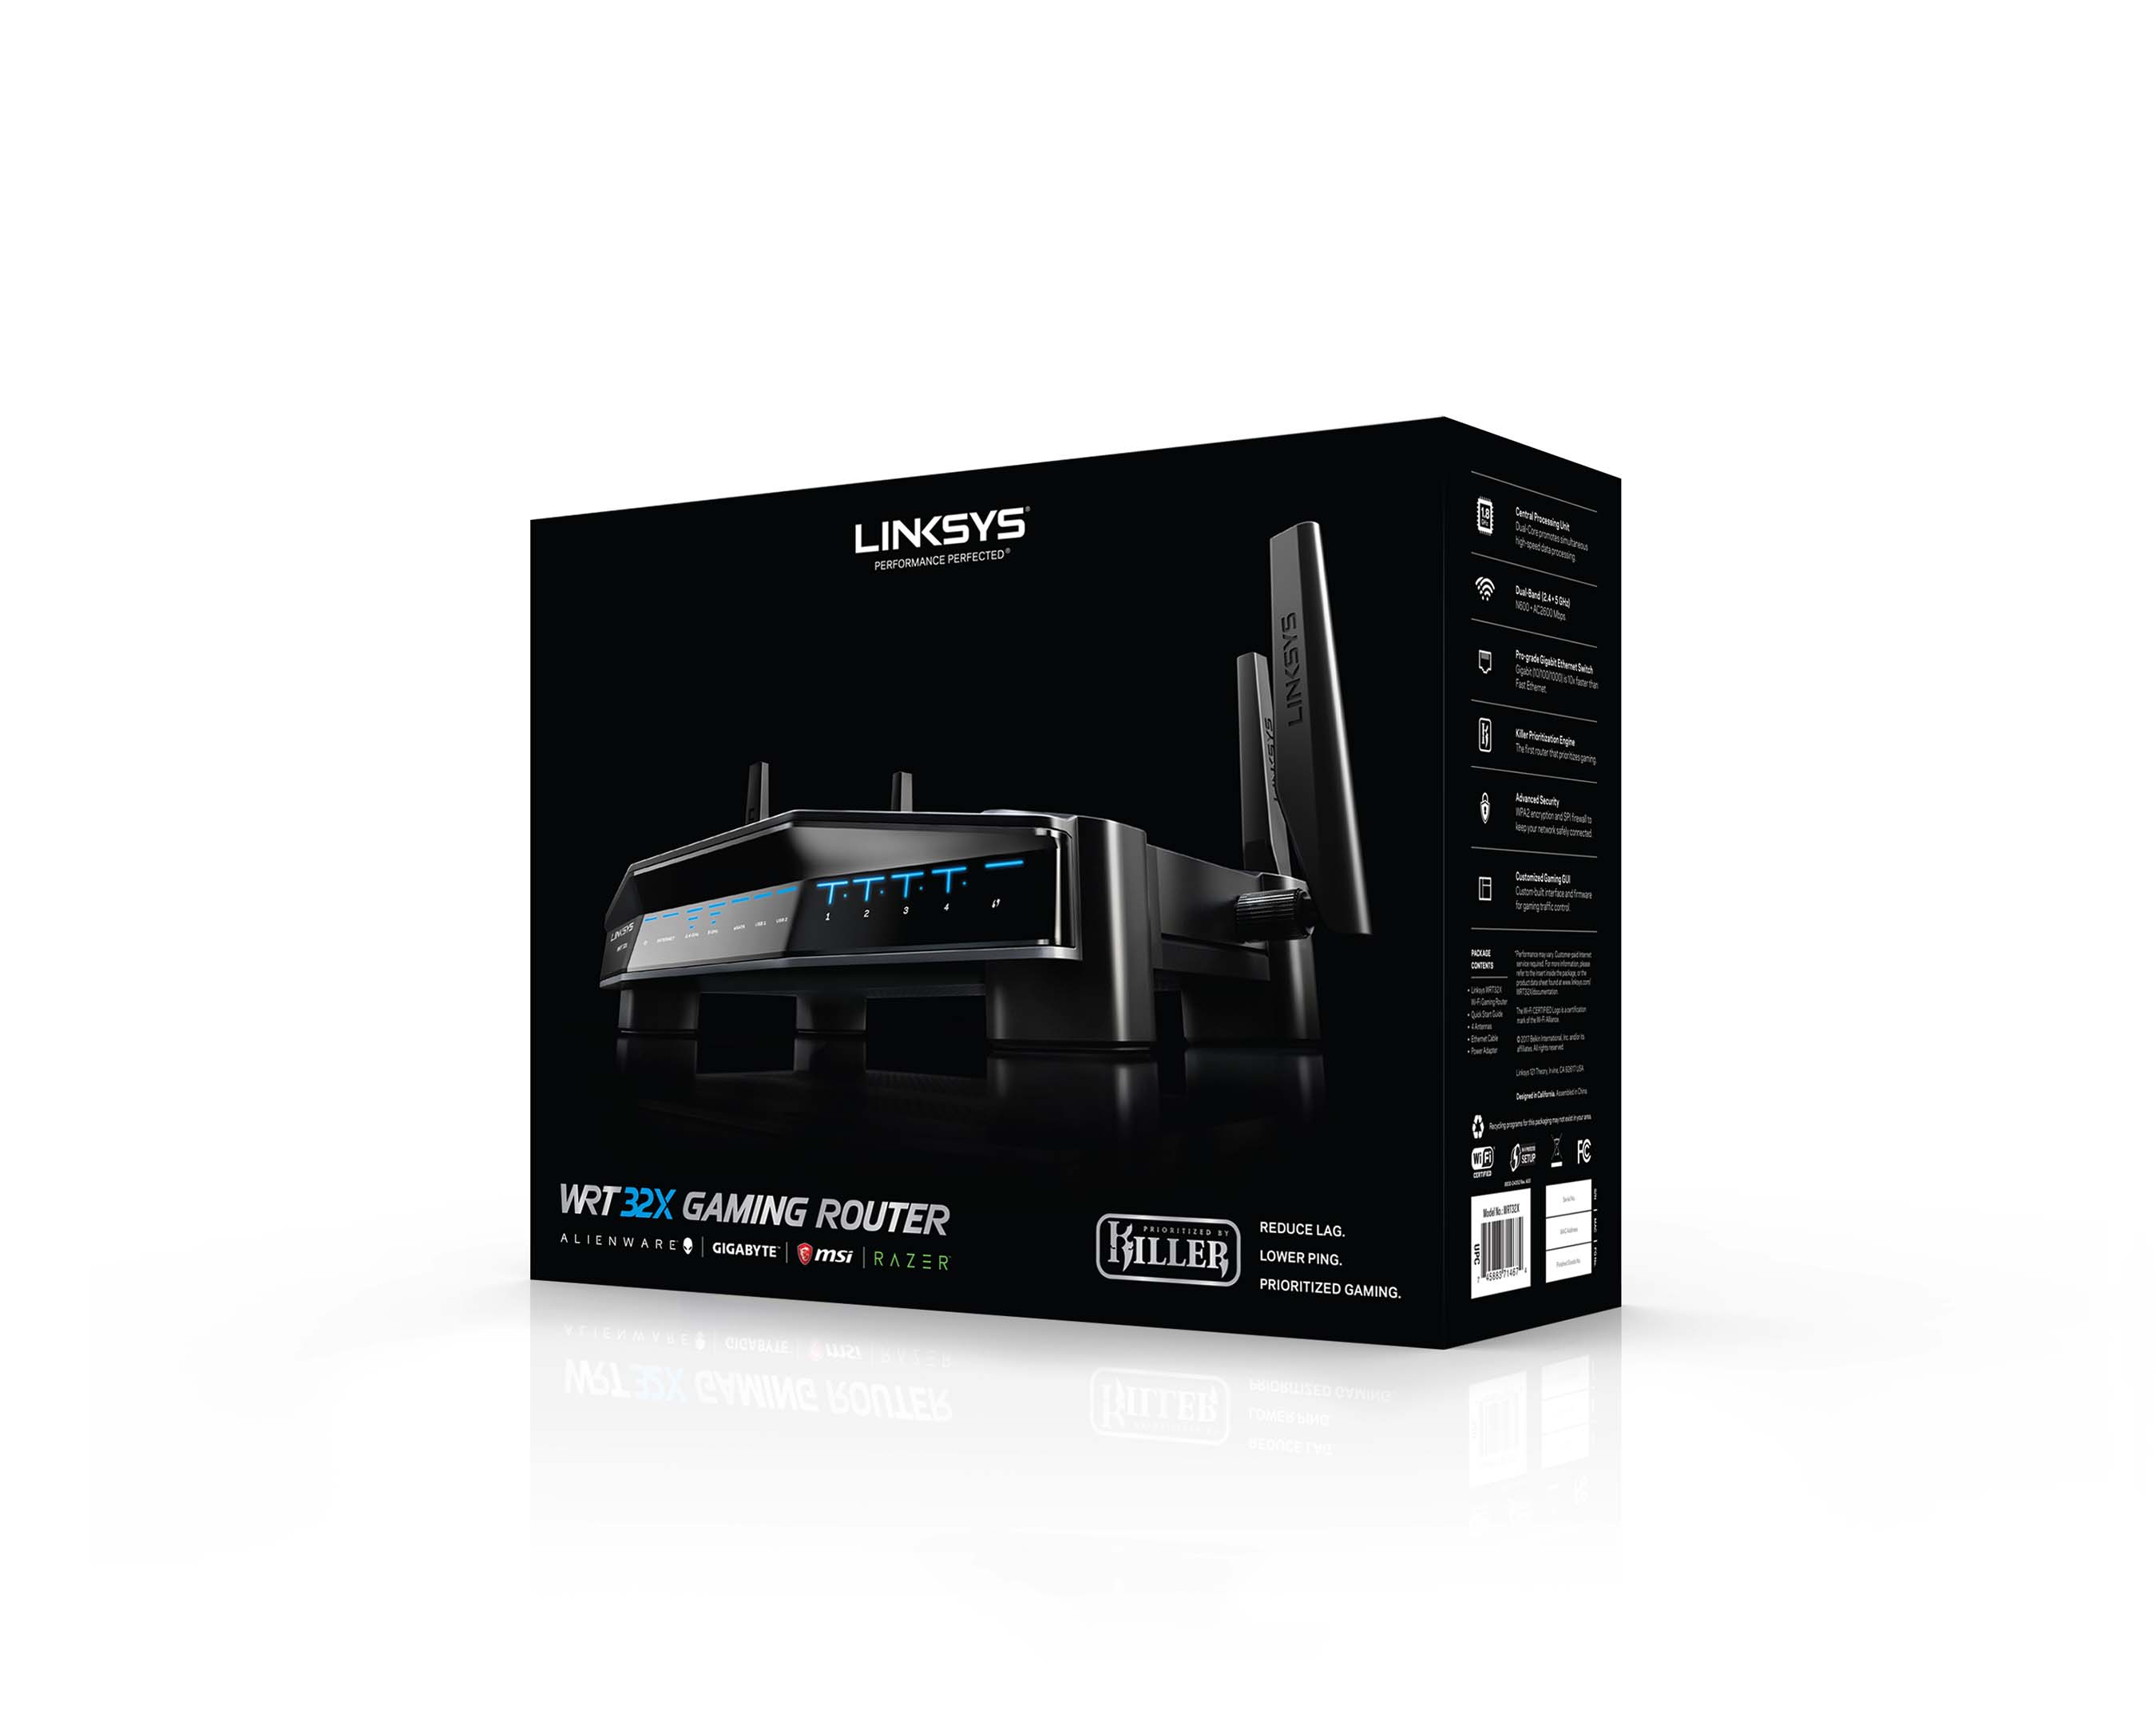 Linksys WRT32X Gaming Router Package